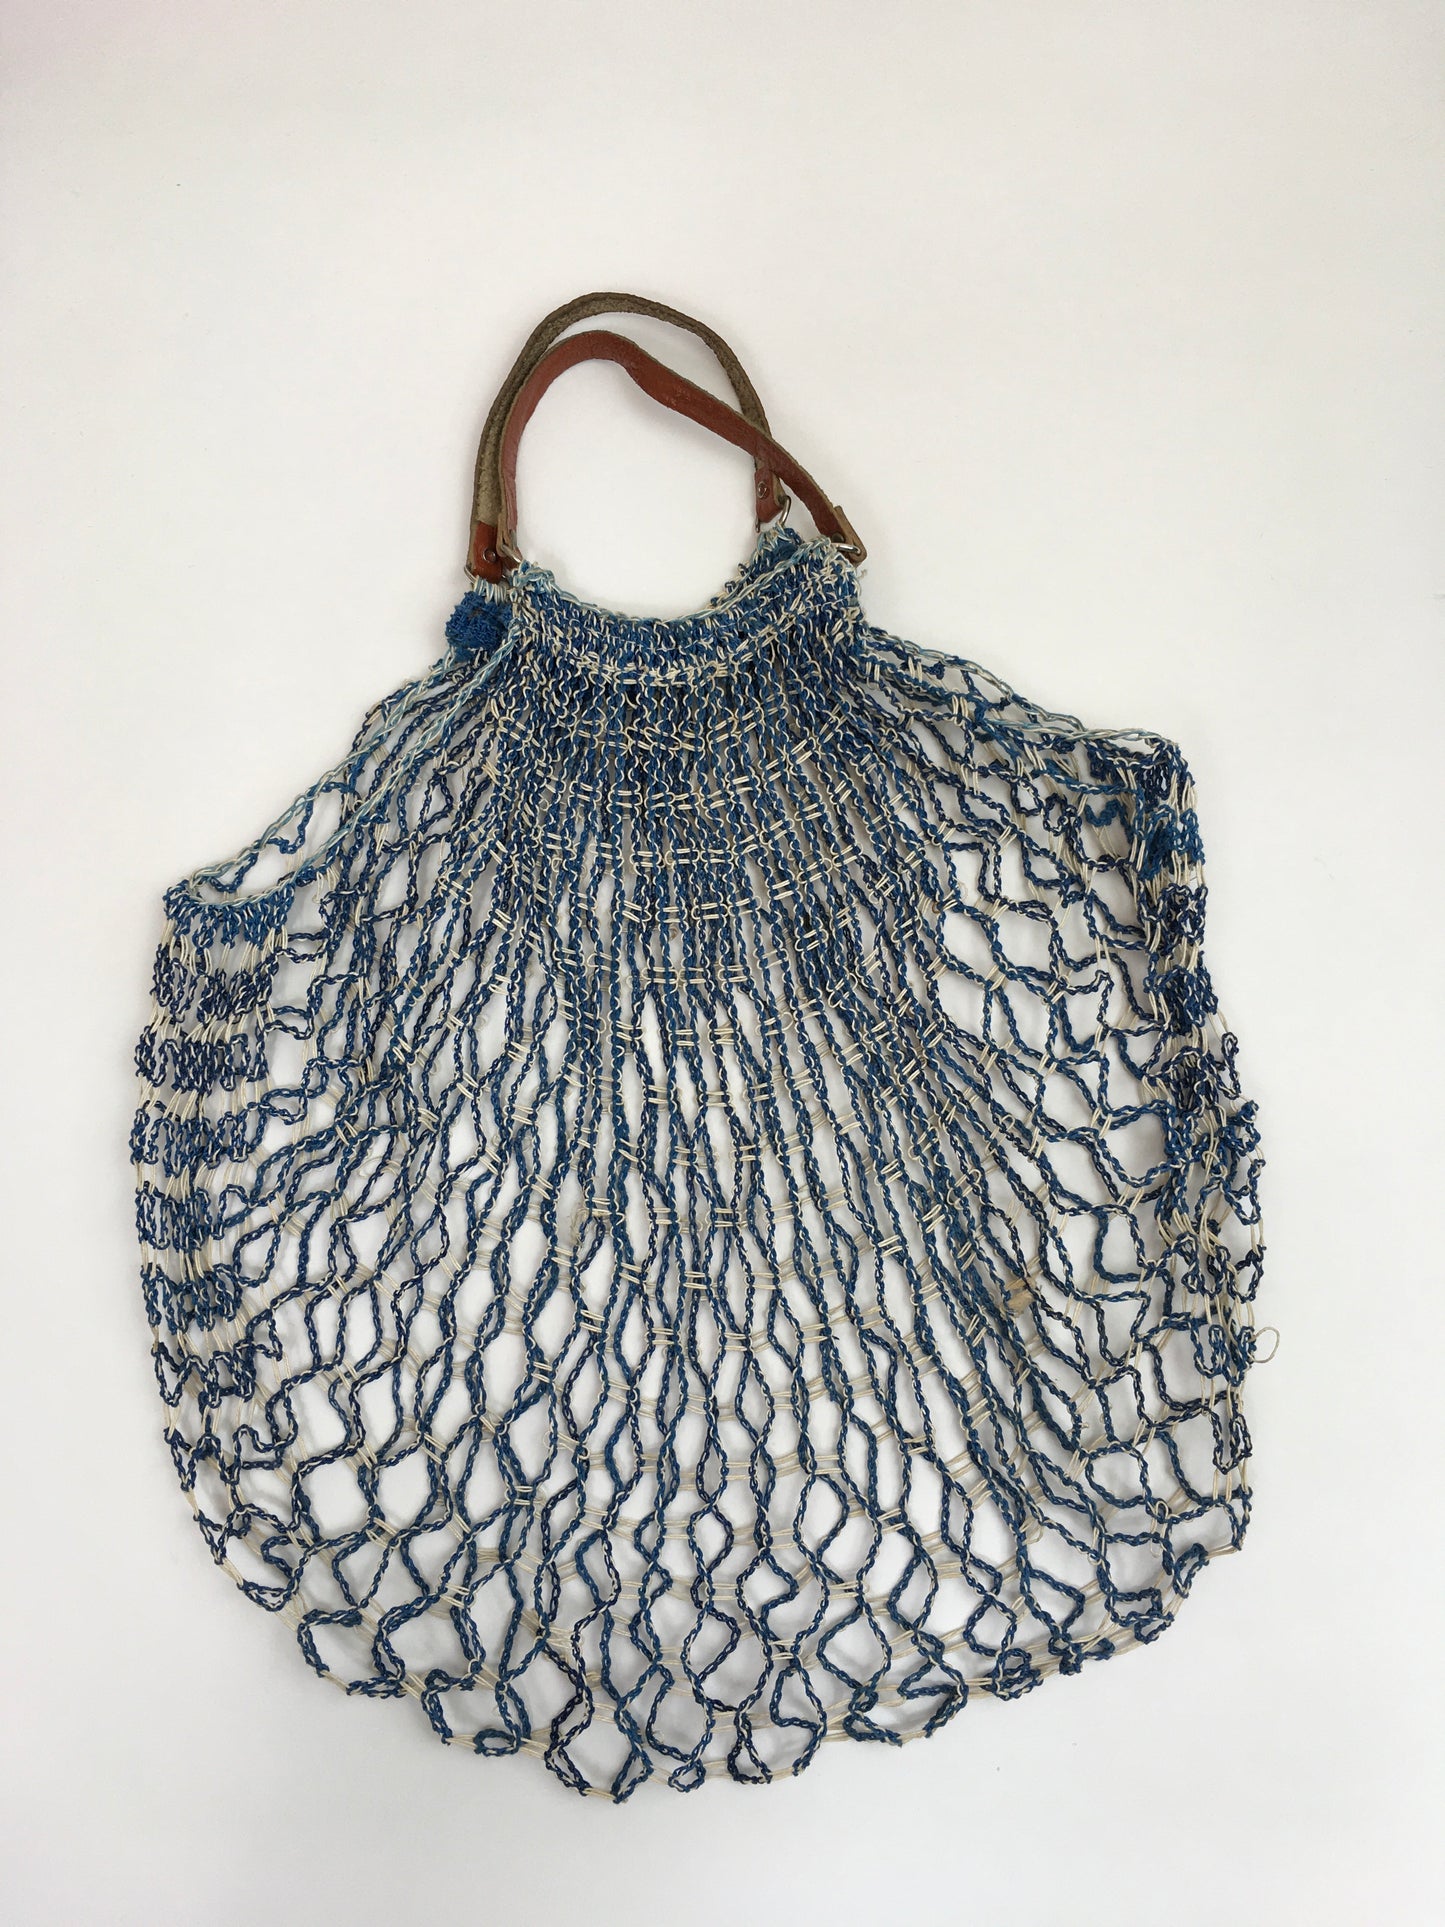 Original 1930’s / 1940’s Blue and White String Bag with Leather Handles - A Fabulous Piece Of Nostalgia